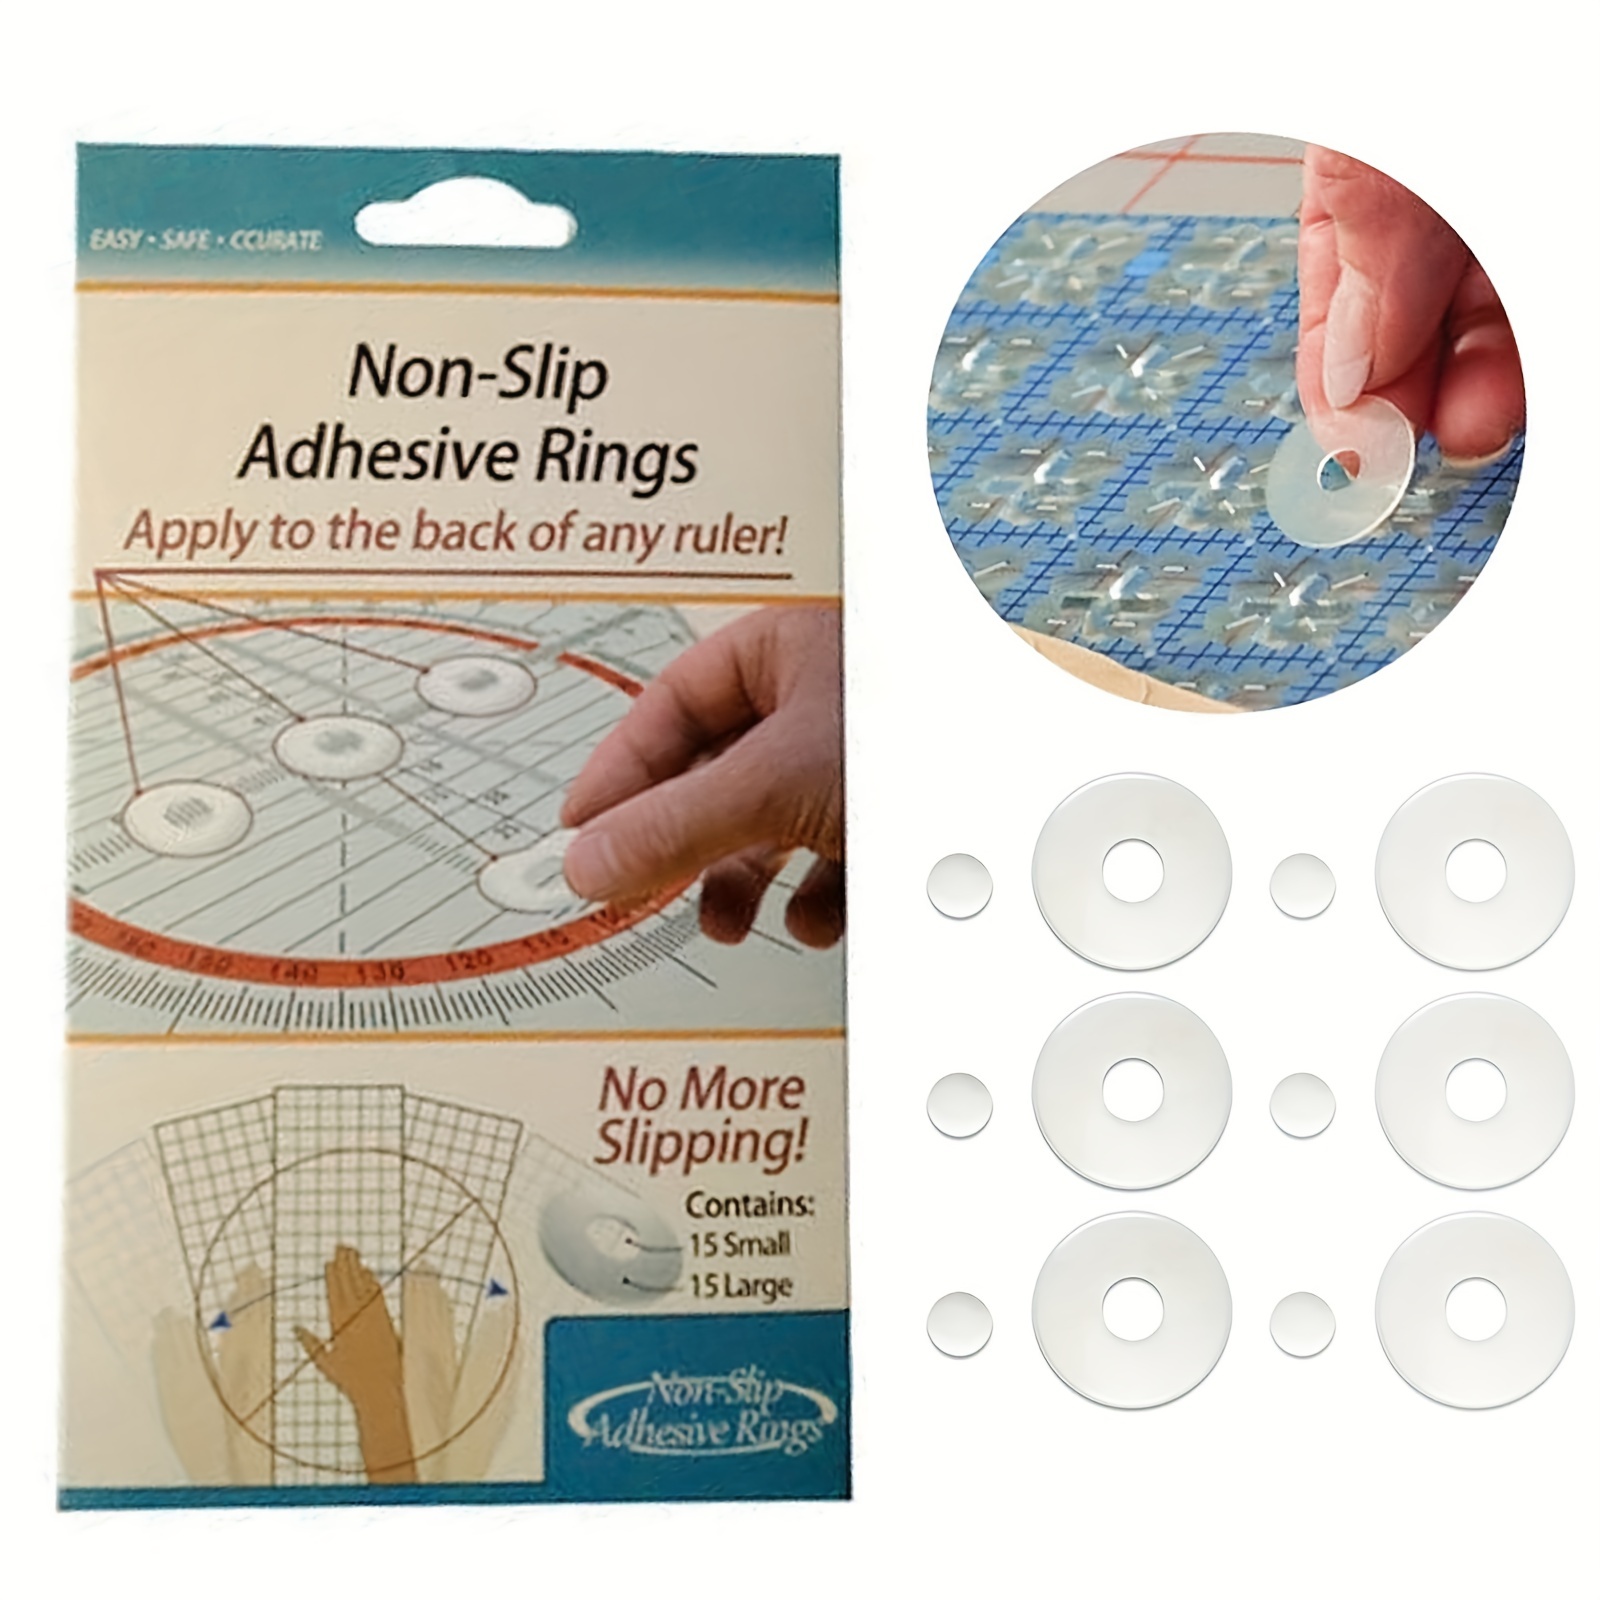 Non-Slip Adhesive Rings for Quilt Rulers and Templates - 40 pcs